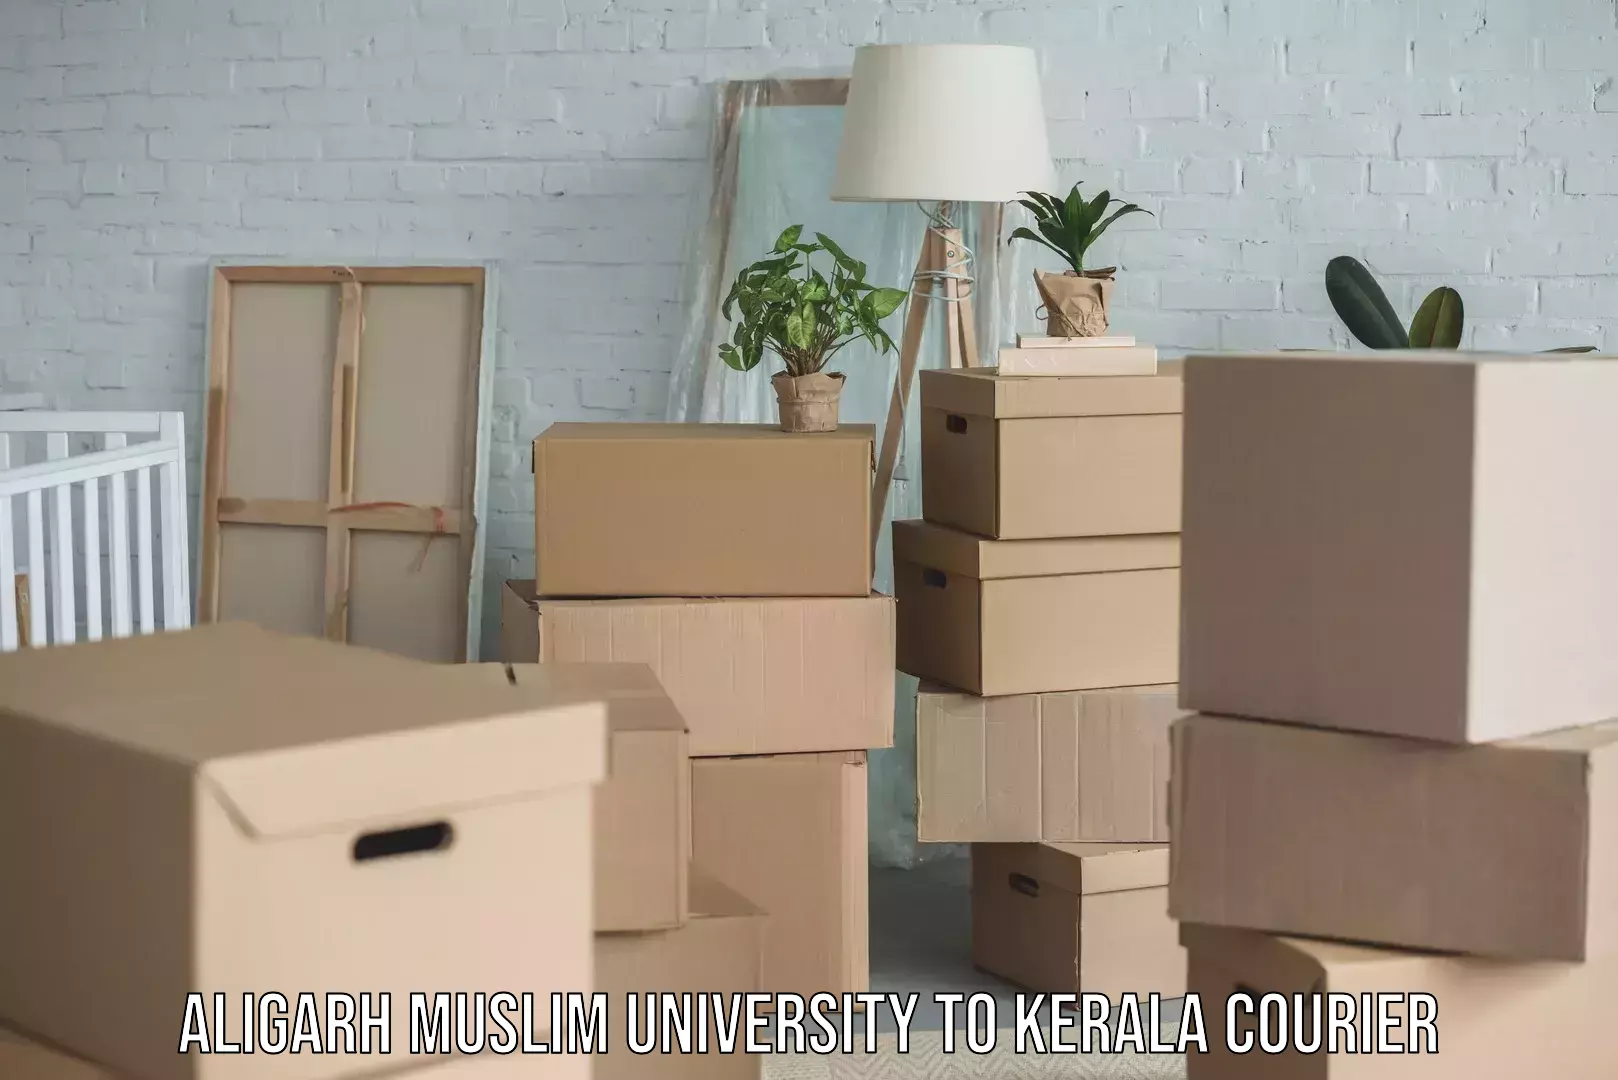 Parcel service for businesses Aligarh Muslim University to Kerala